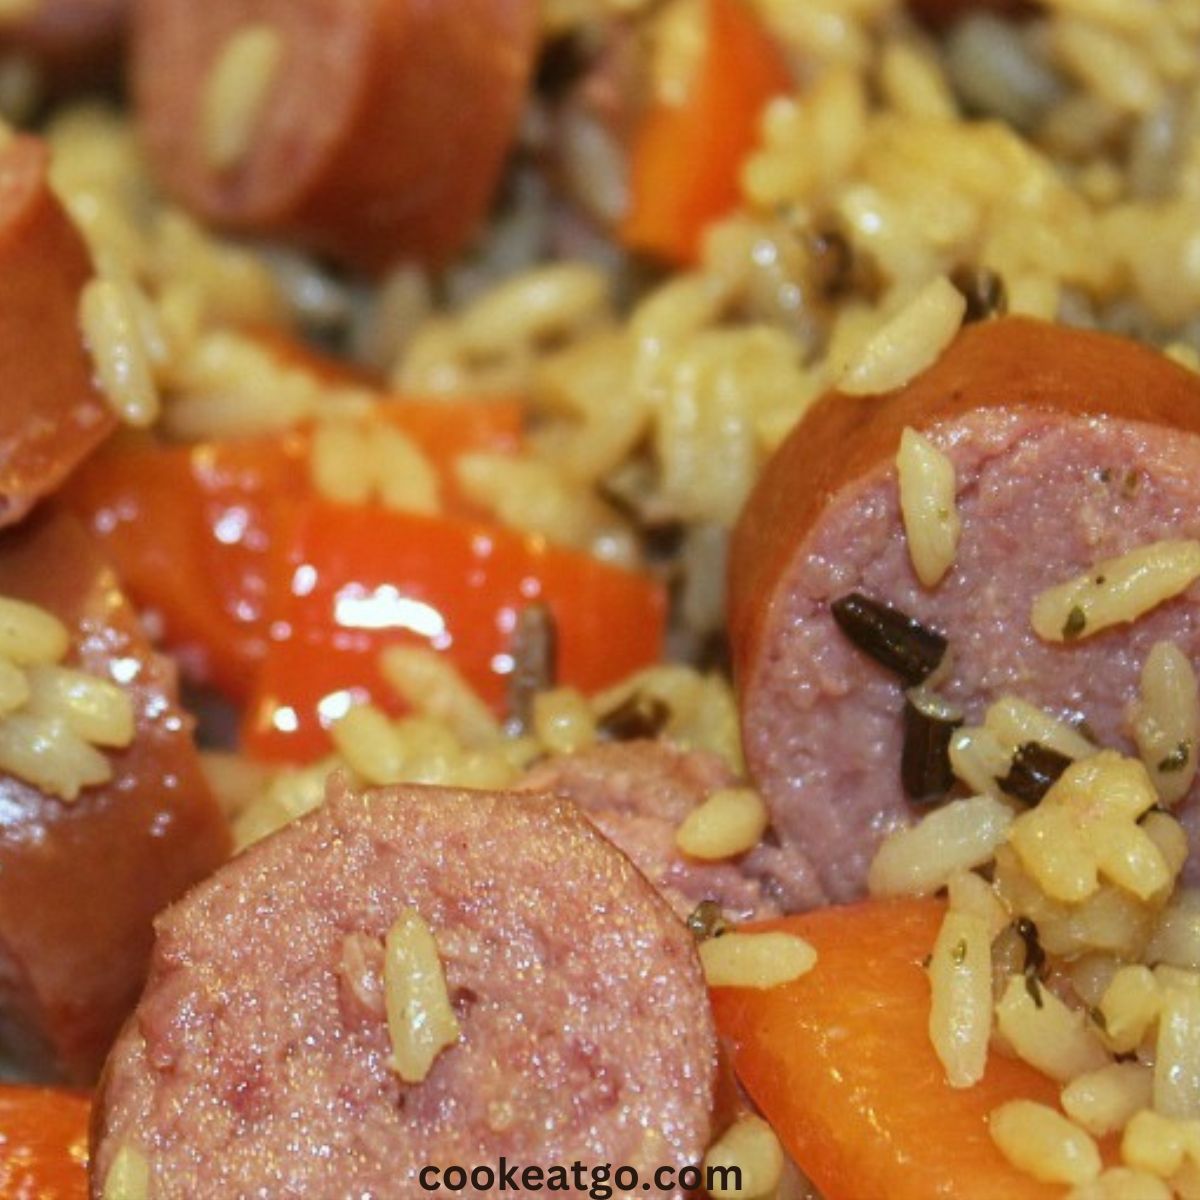 Sausage and rice skillet dinner